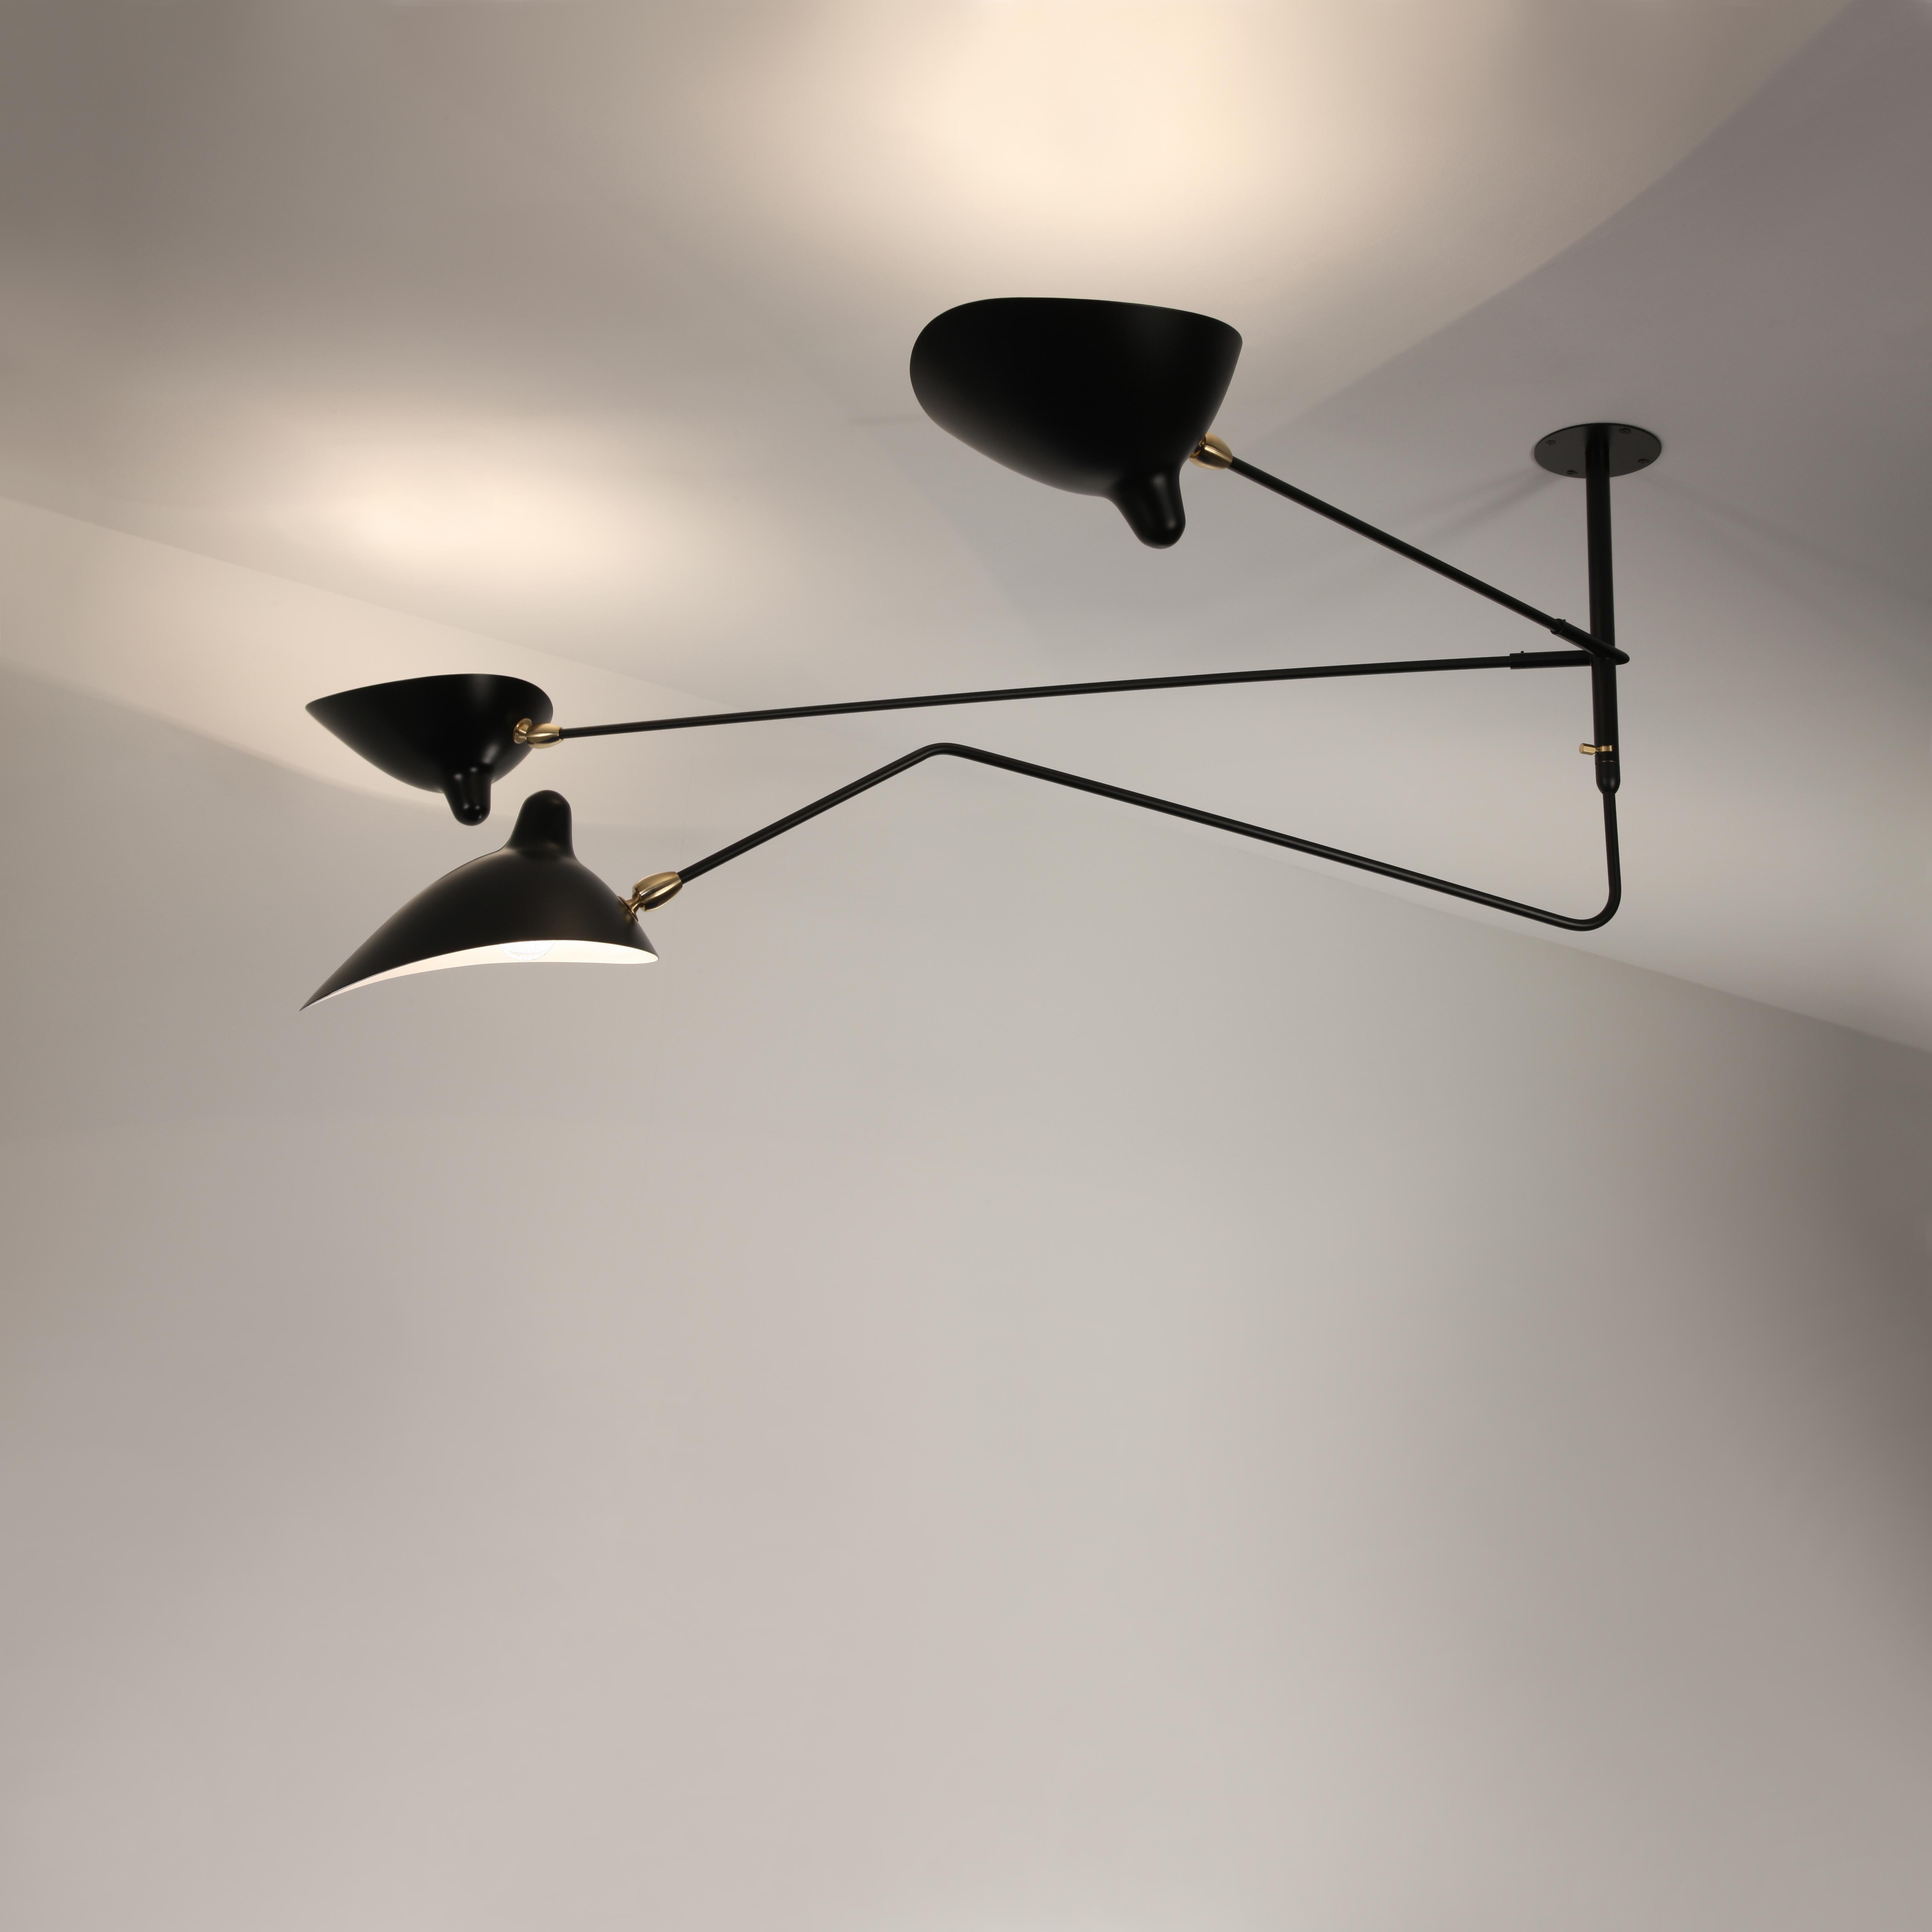 French Serge Mouille Three Arms, One Rotating Ceiling Sconce Lamp